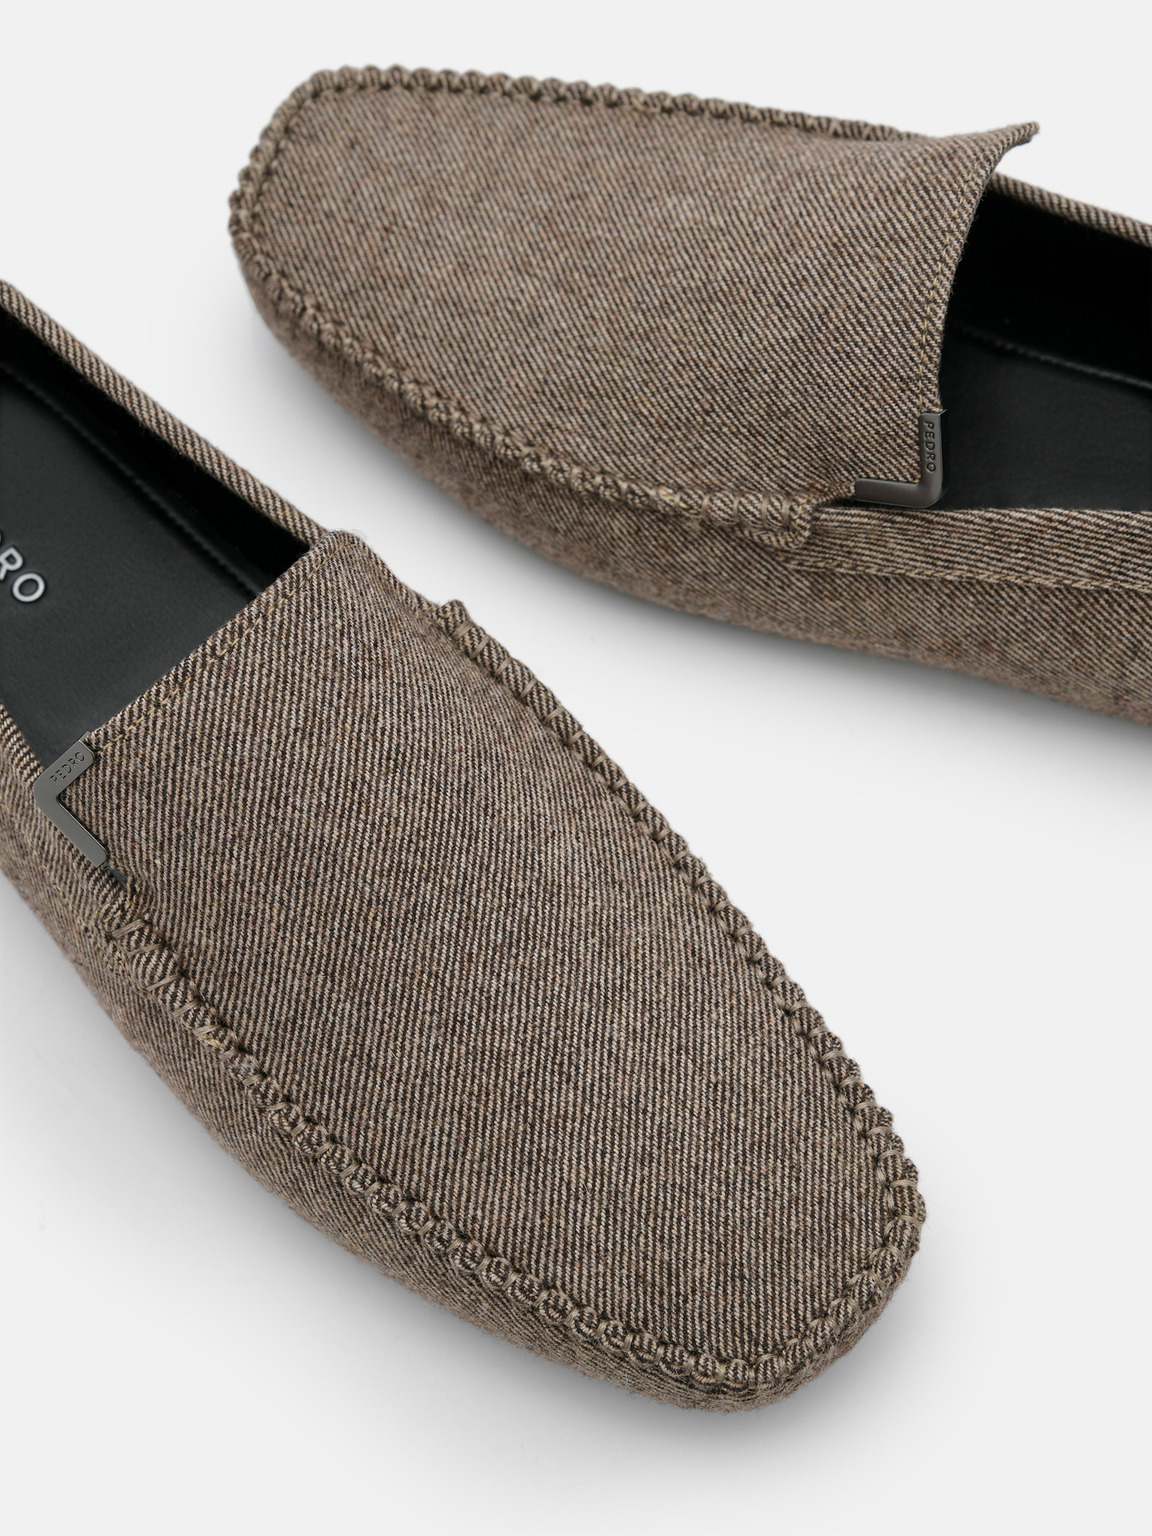 Fabric Driving Shoes, Taupe